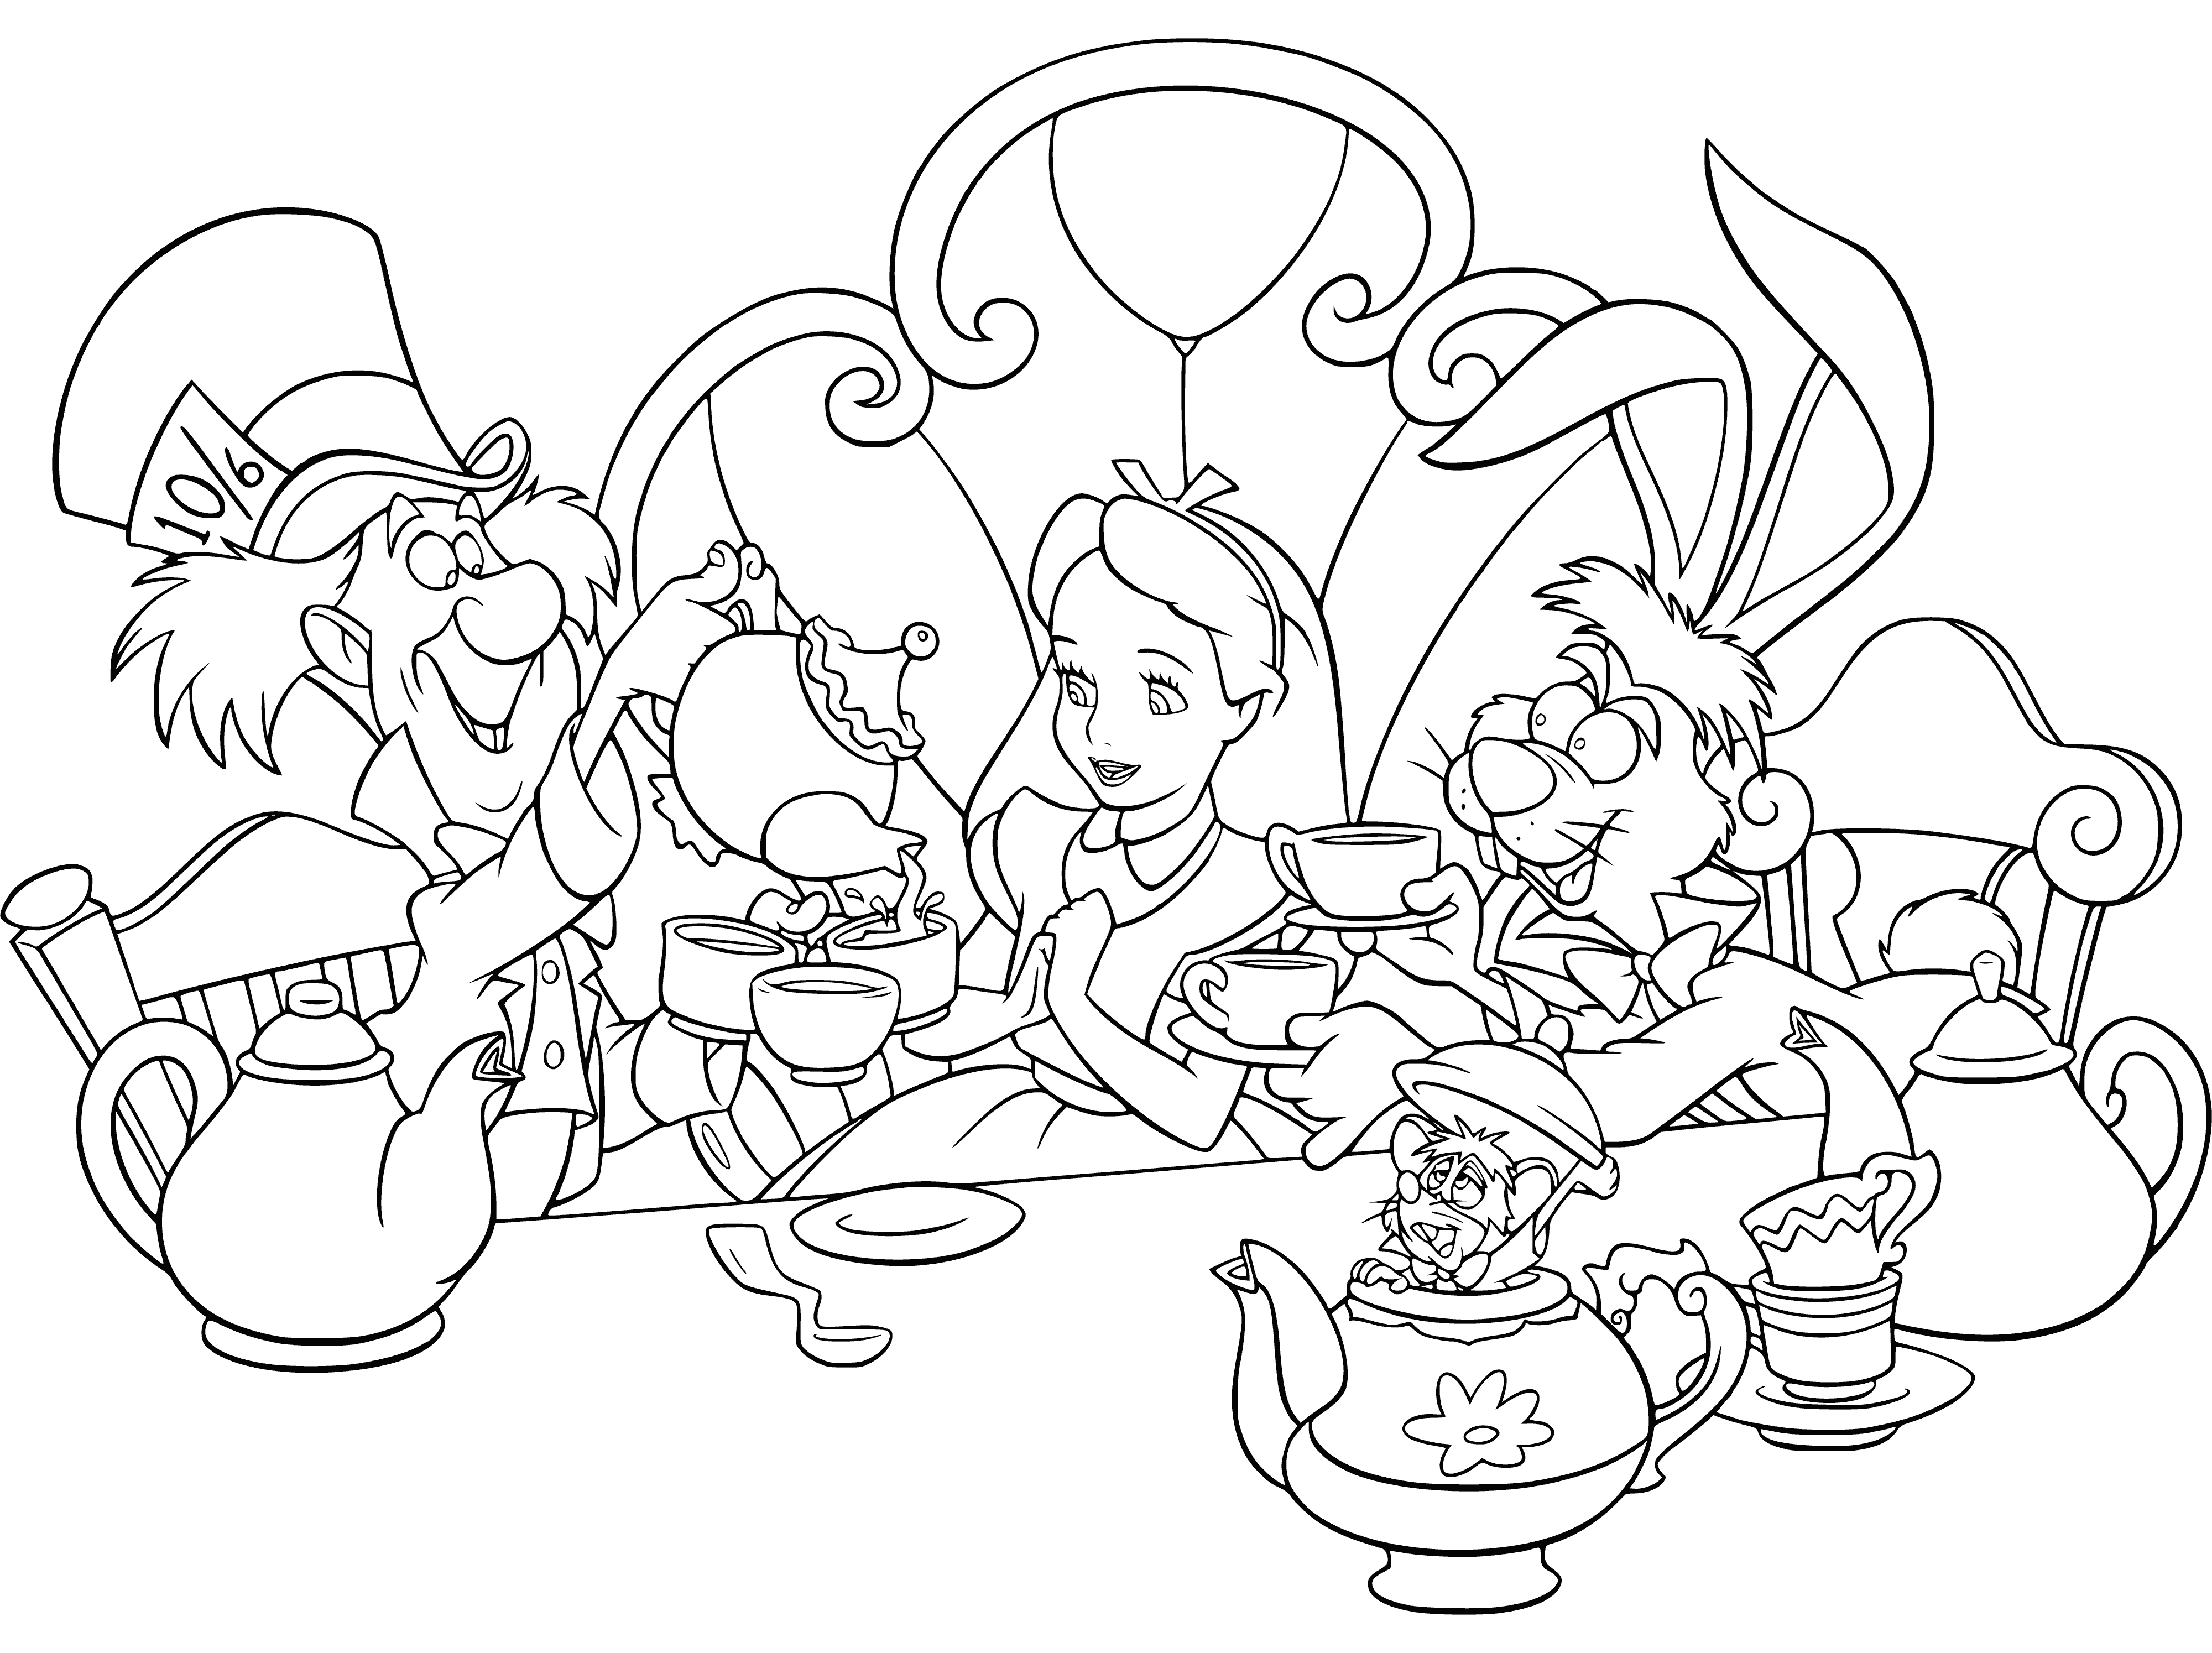 coloring page: Alice sits with tea & cake, looking at pot with a smile, enjoying a peaceful moment.